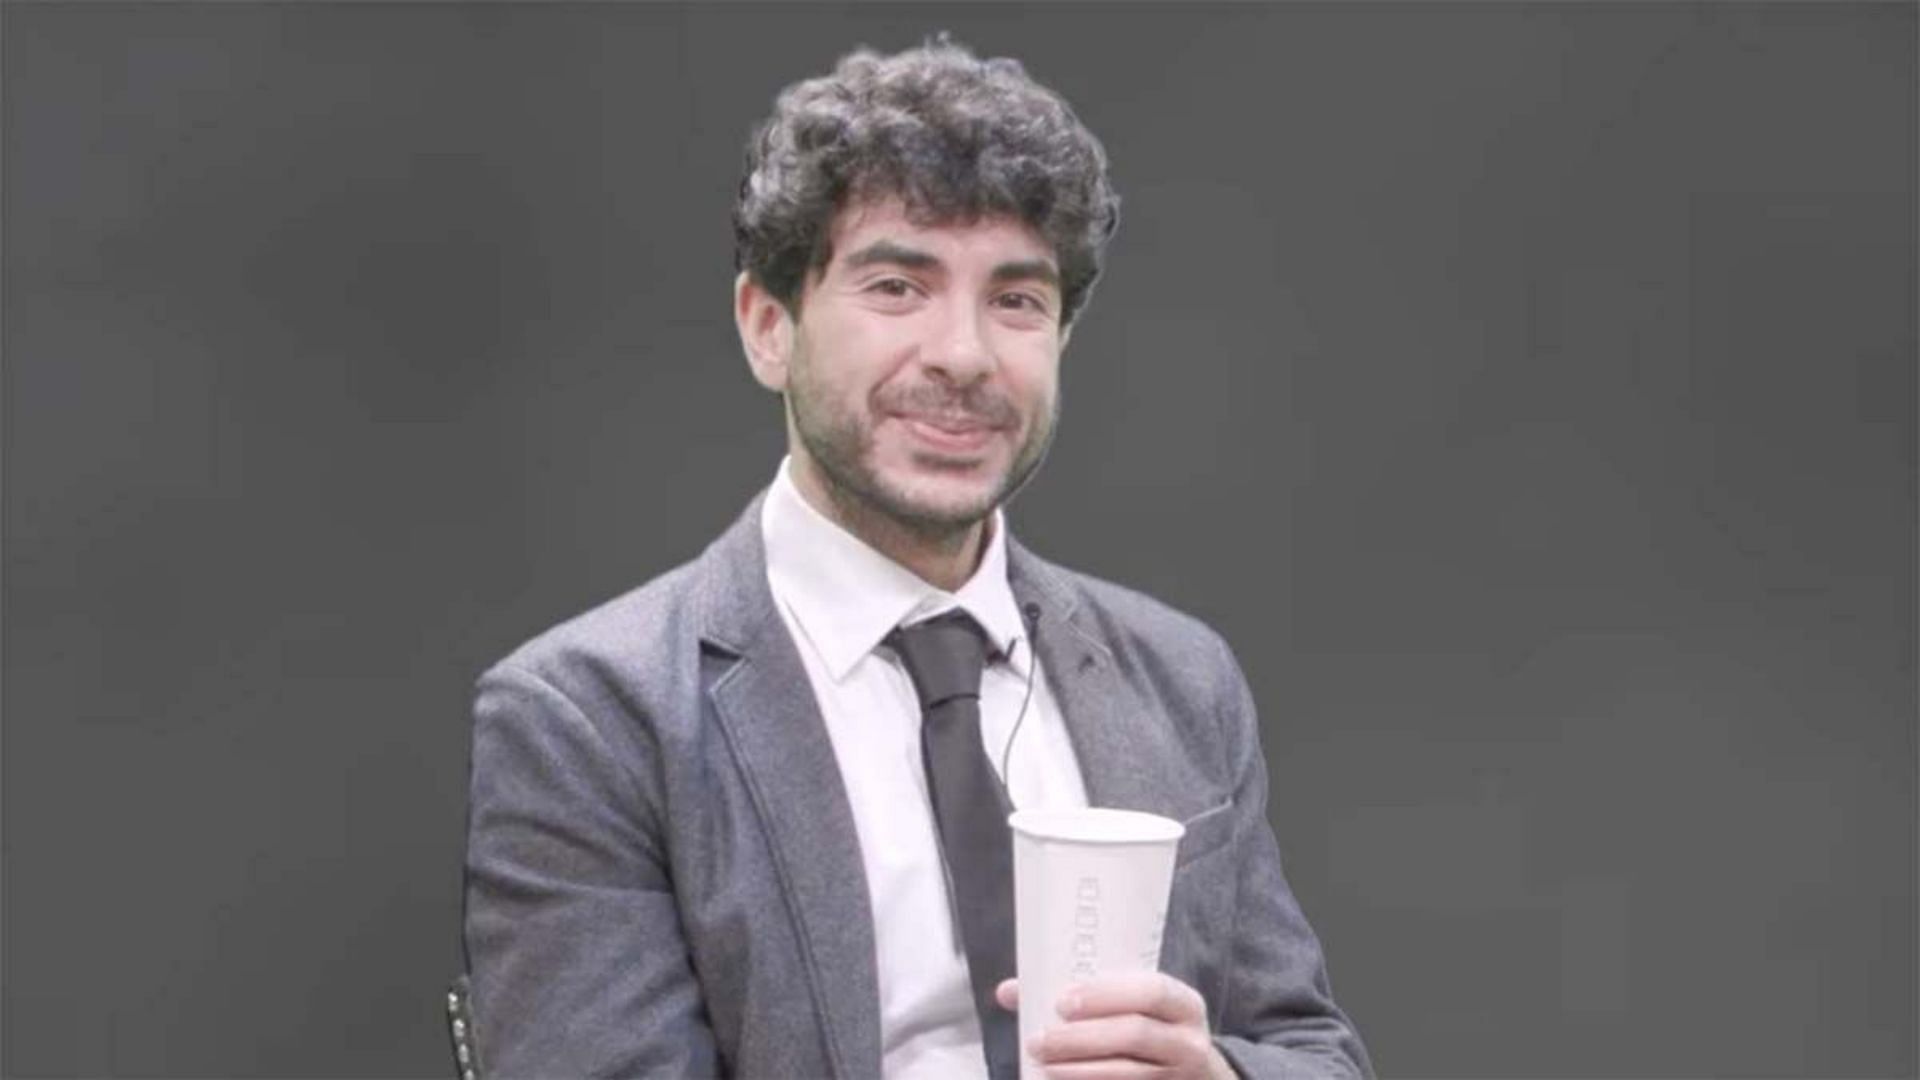 Tony Khan at a media event in 2021